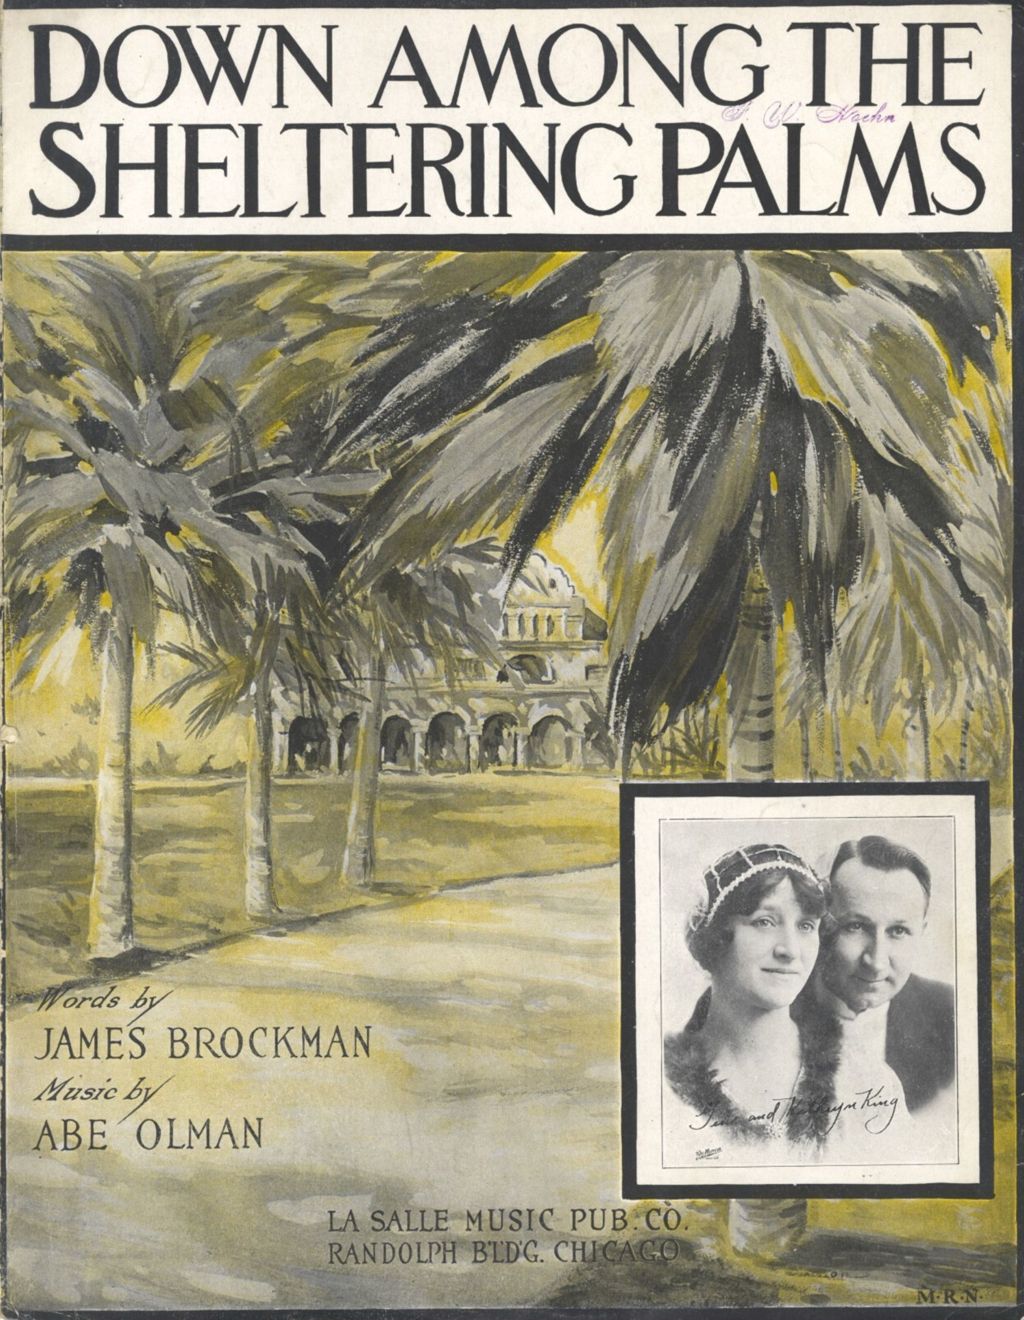 Down Among the Sheltering Palms